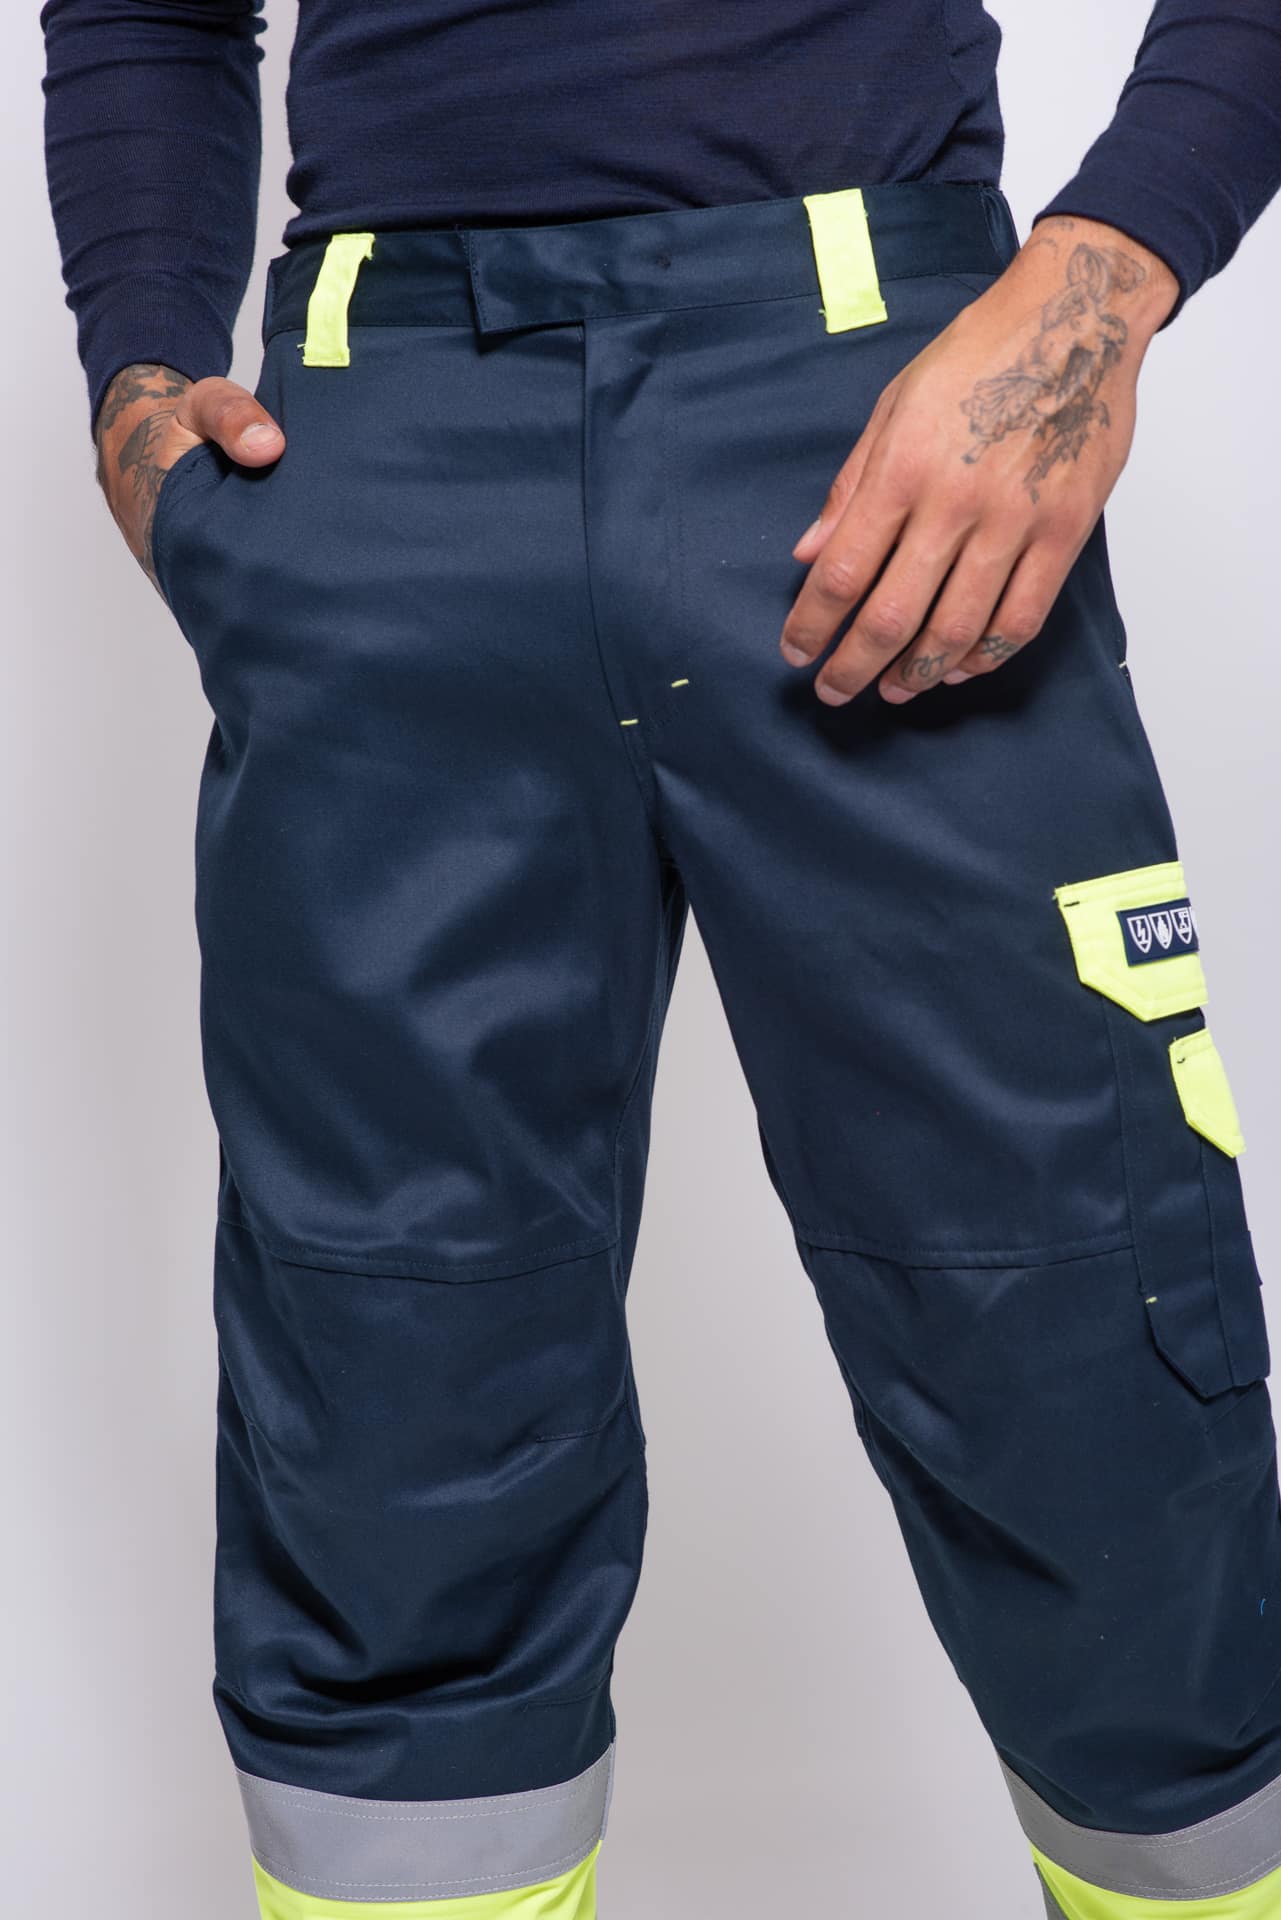 Xpert Core Stretch Work Trousers - The Workwear Centre